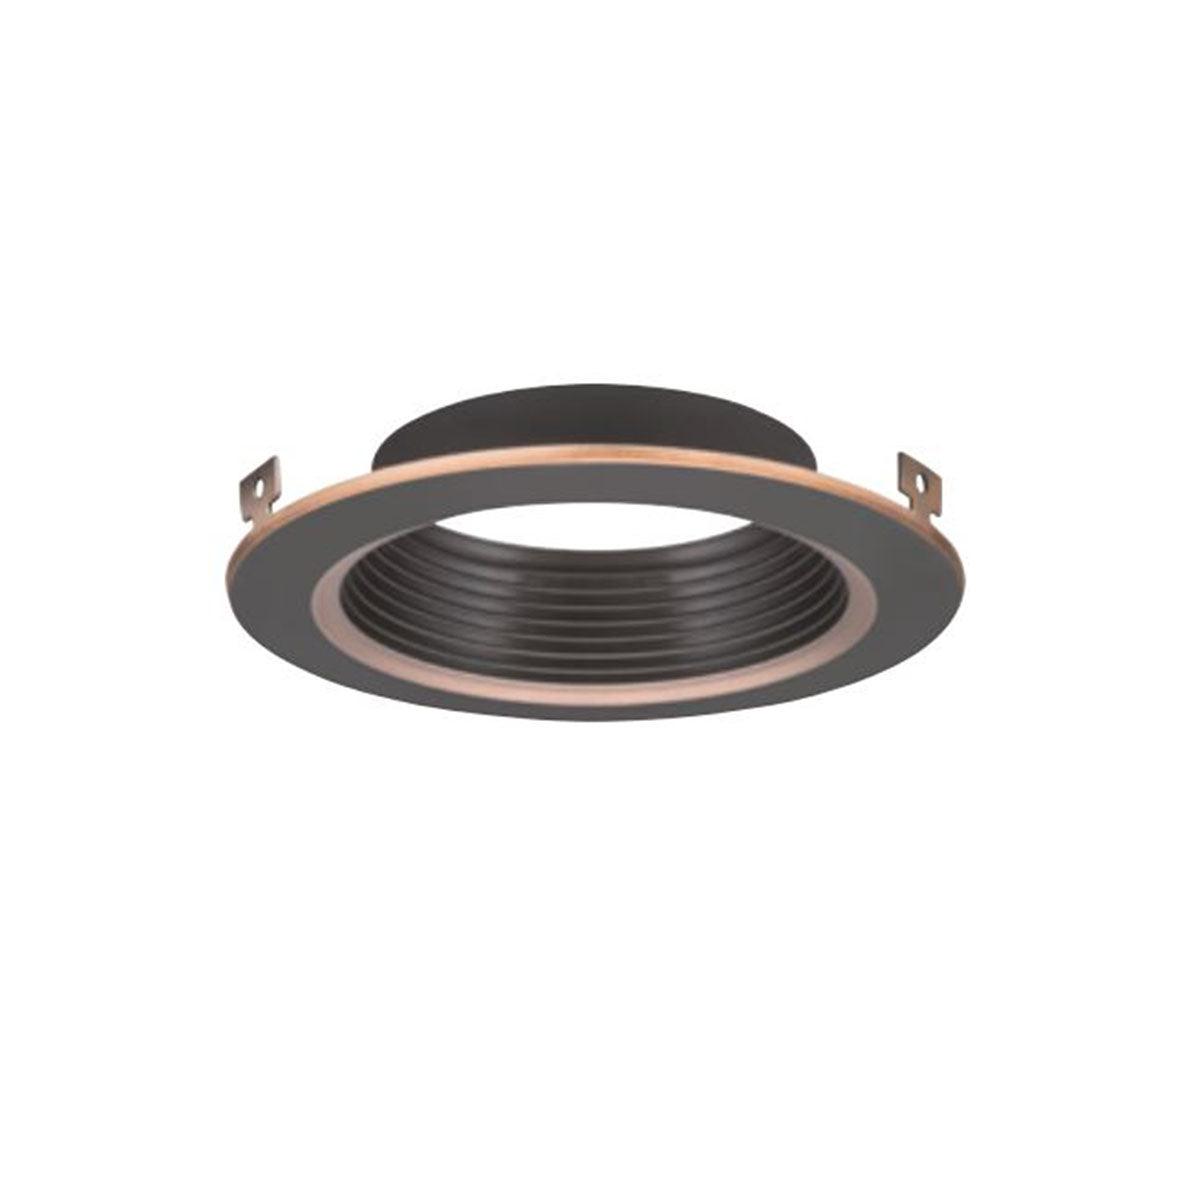 4" Round Baffle Trim Oil Rubbed Bronze Finish - Bees Lighting